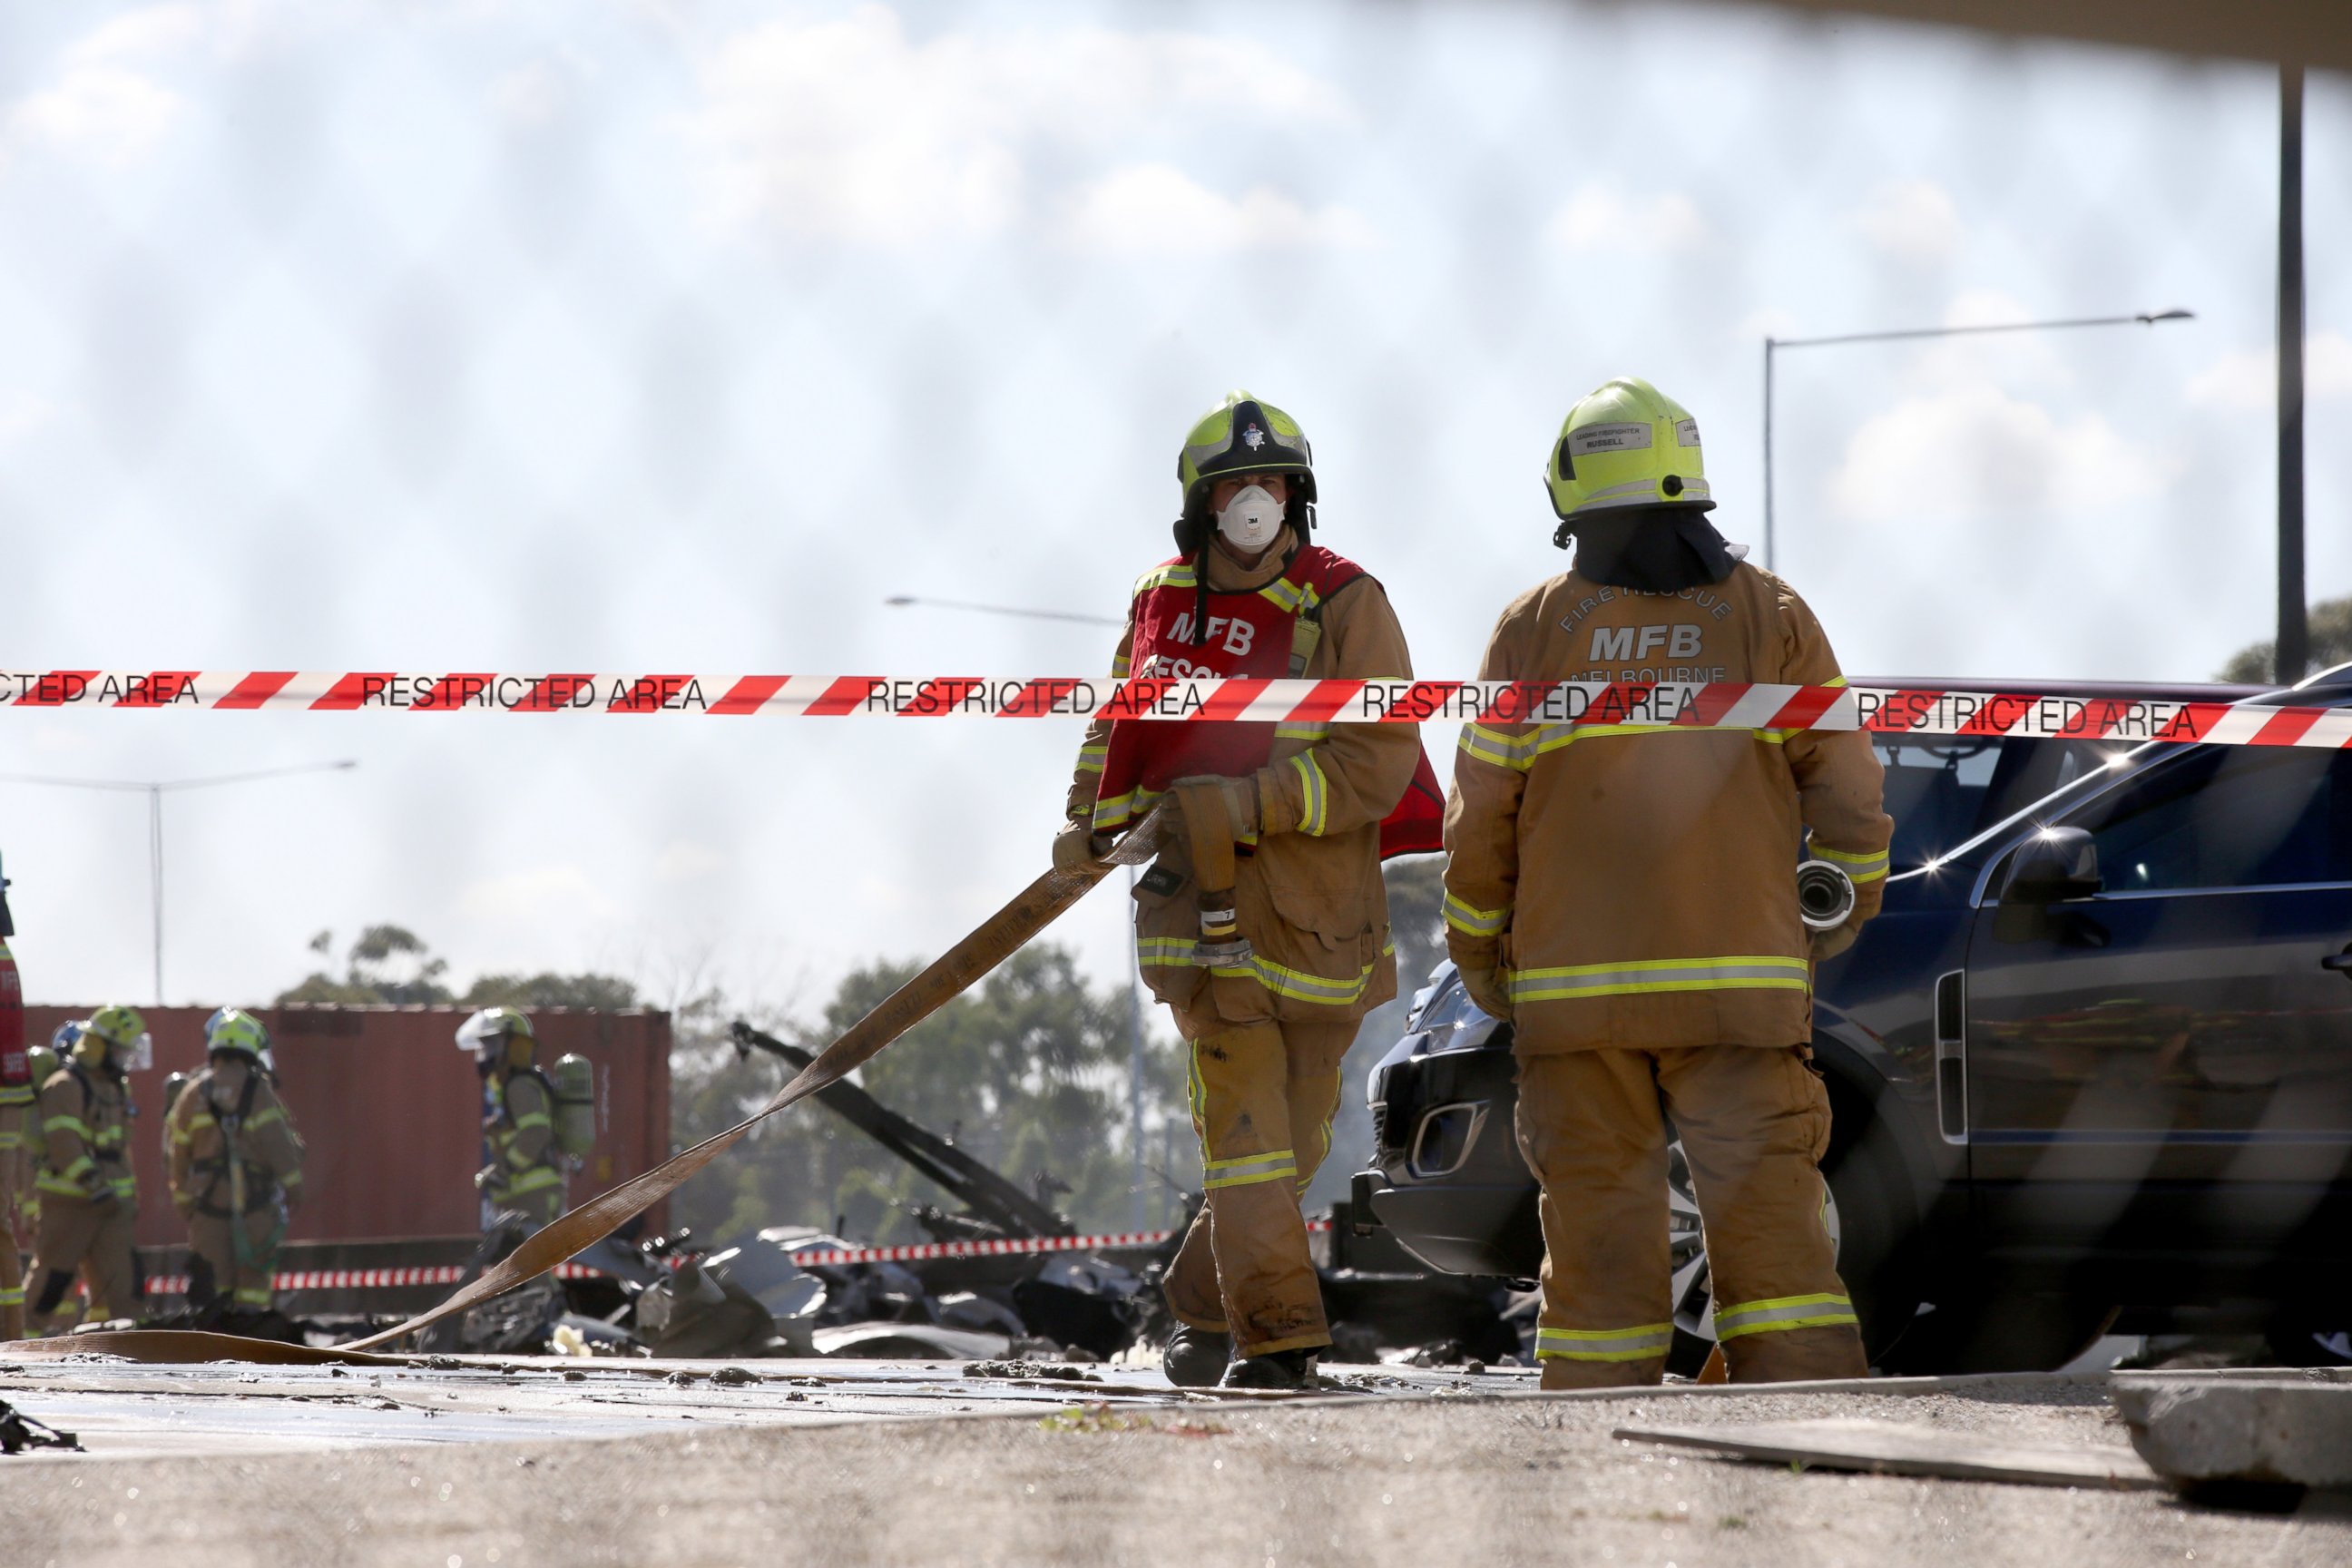 PHOTO: Firefighters on the scene after a light plane crashed into a DFO (Discount Factory Outlet) near Essendon Airport, in Melbourne, Australia, on Feb 21, 2017.